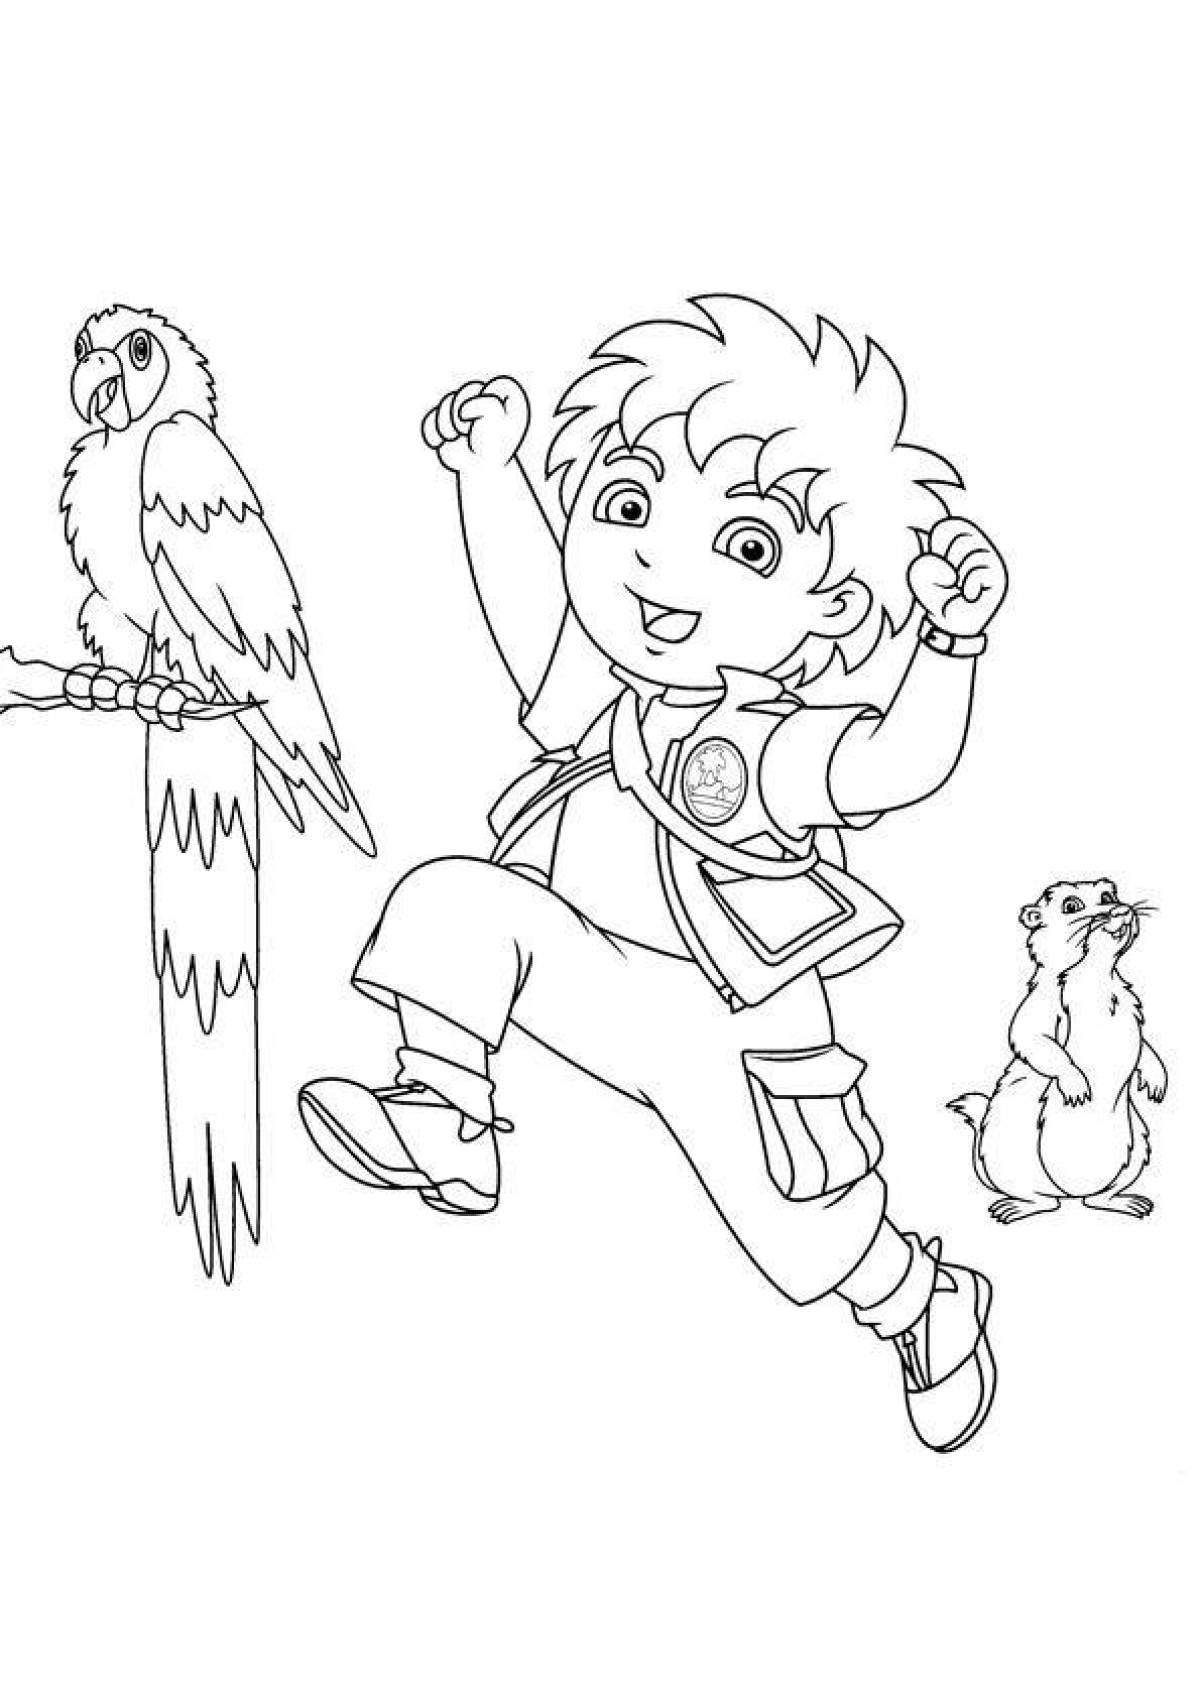 Diego go's colorful coloring page